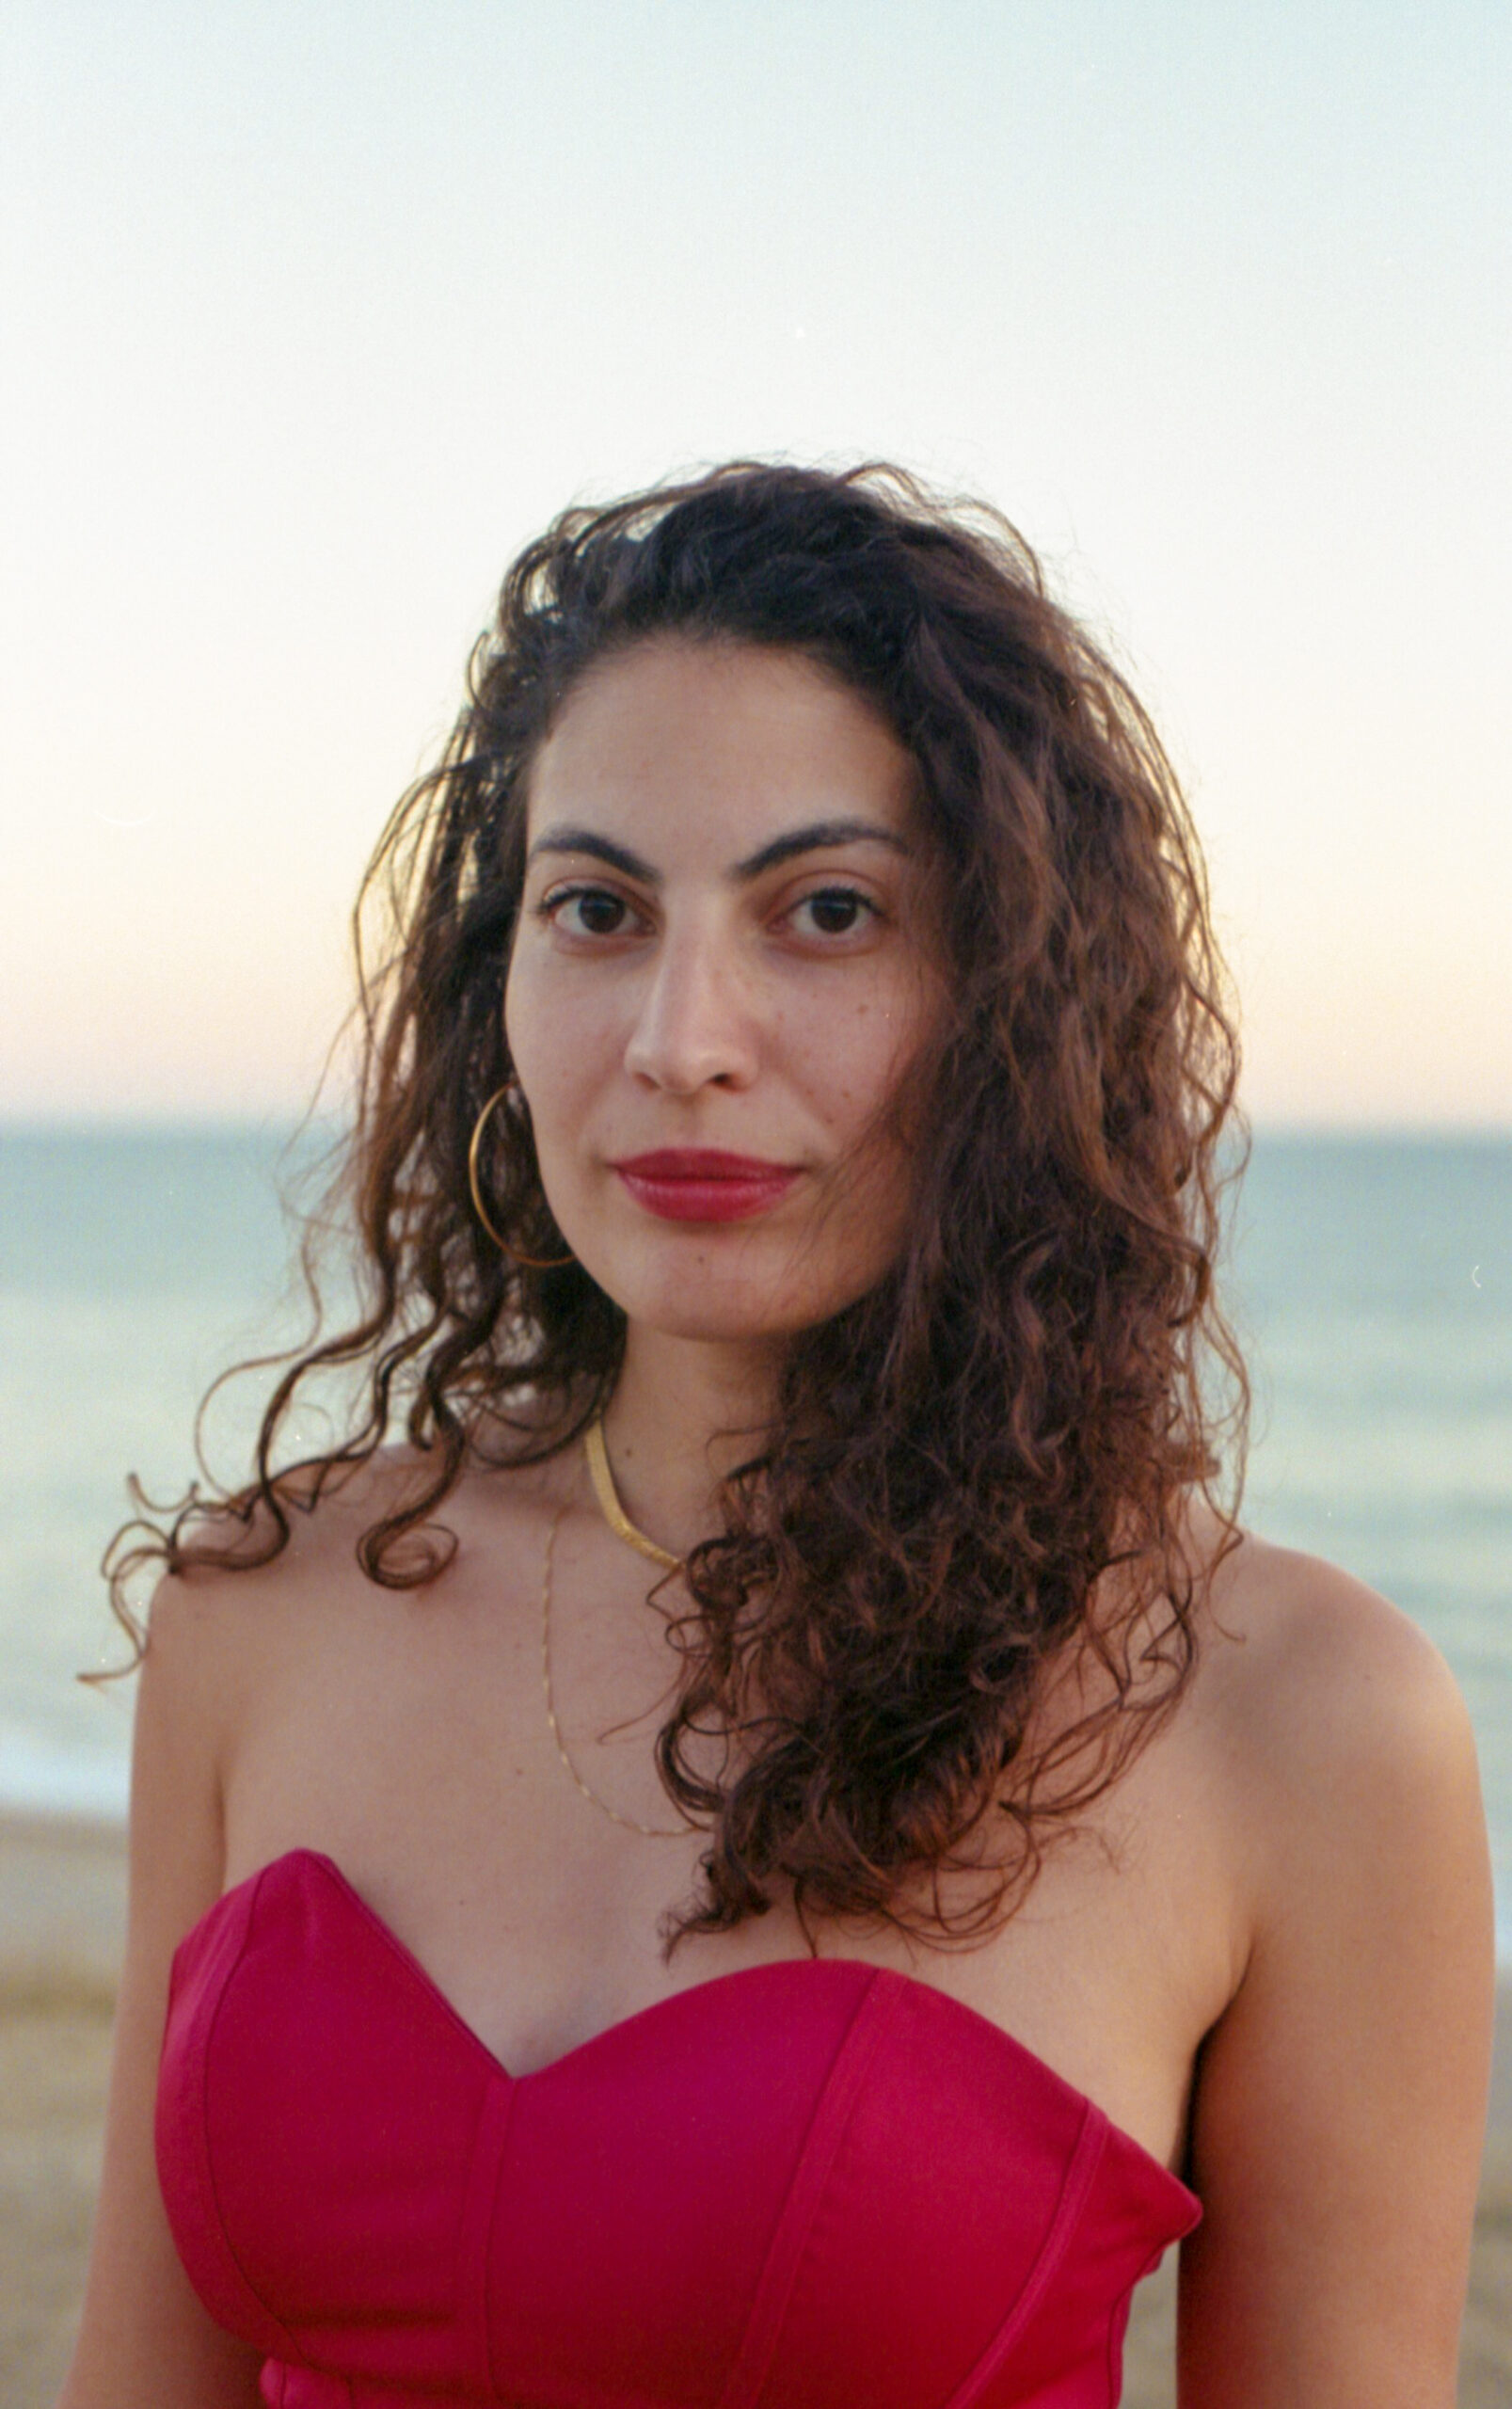 Image of a Arab Jewish woman with cold jewelry and red outfit set in front of ocean view